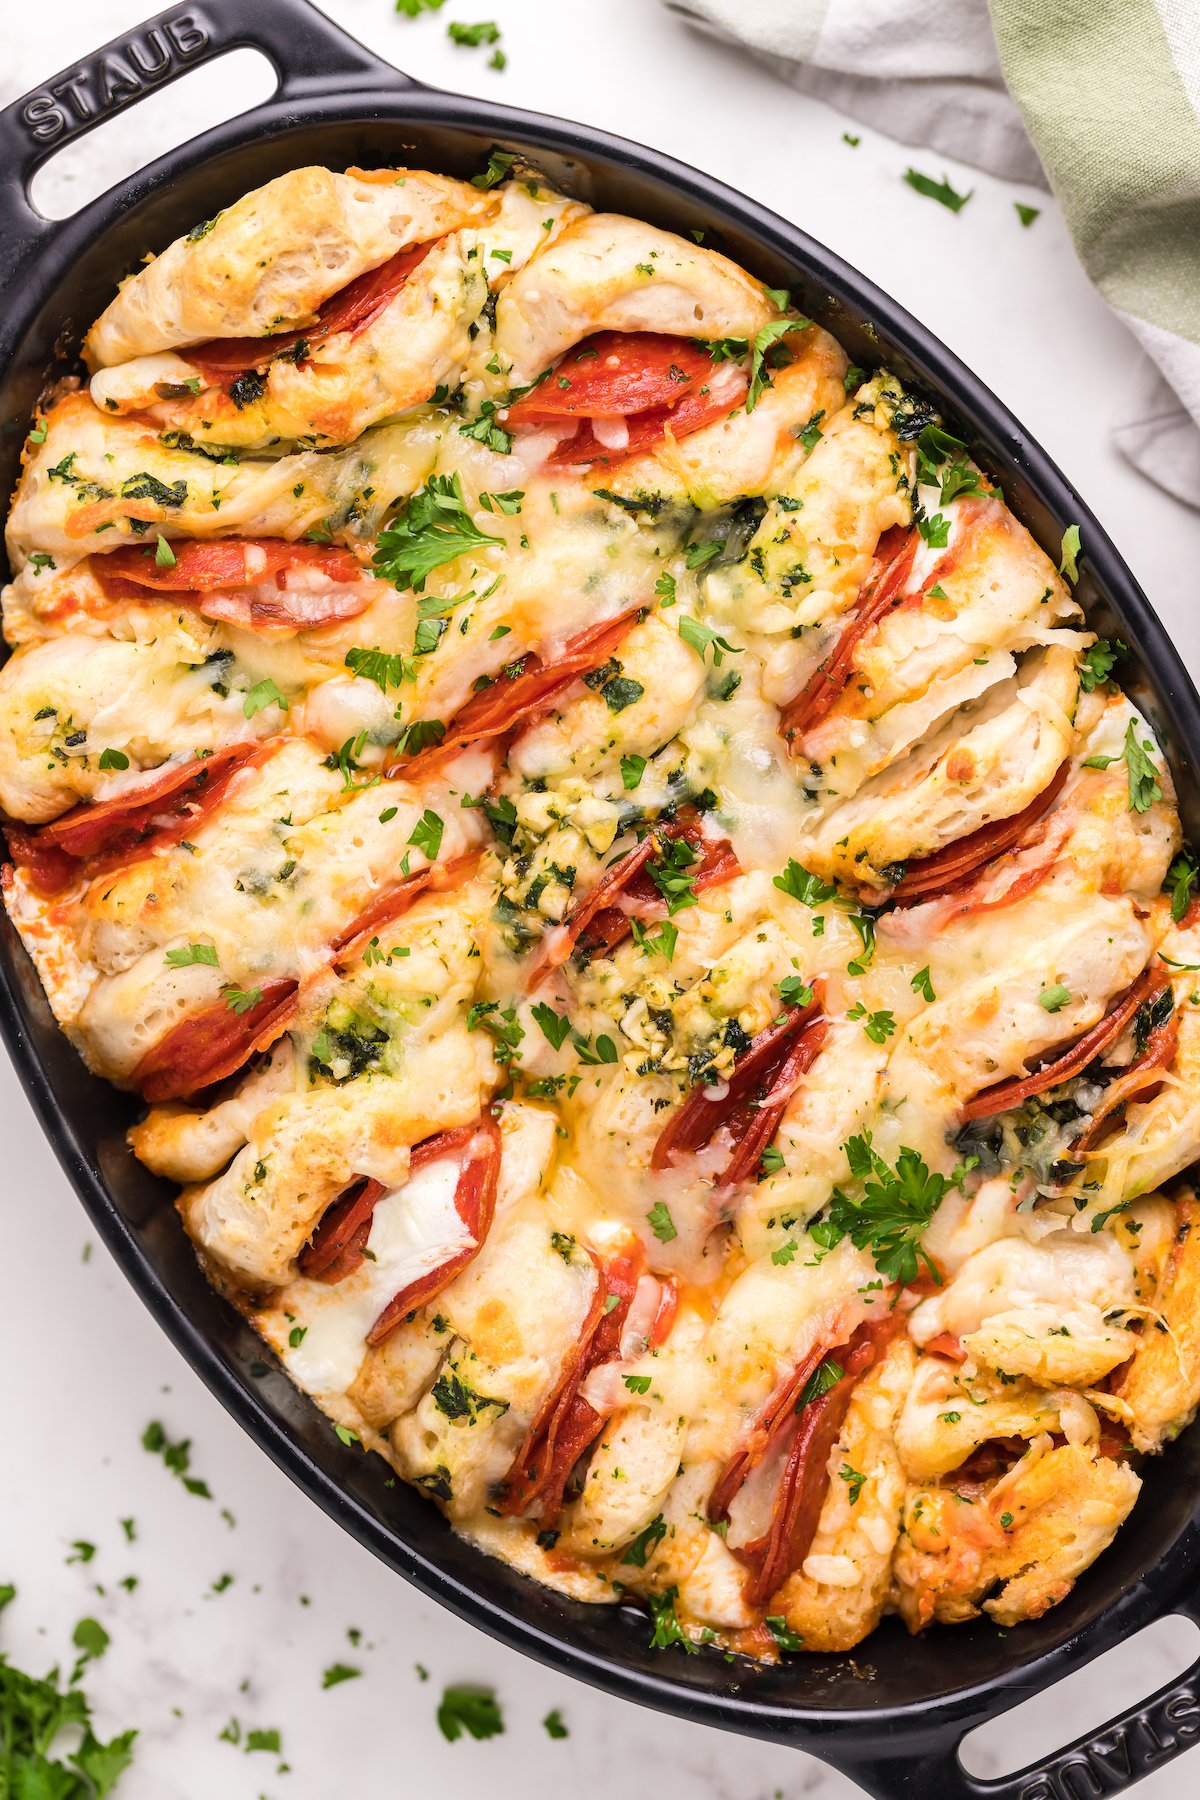 An oval casserole dish that's filled with canned biscuits stuffed with pizza toppings to make a casserole.